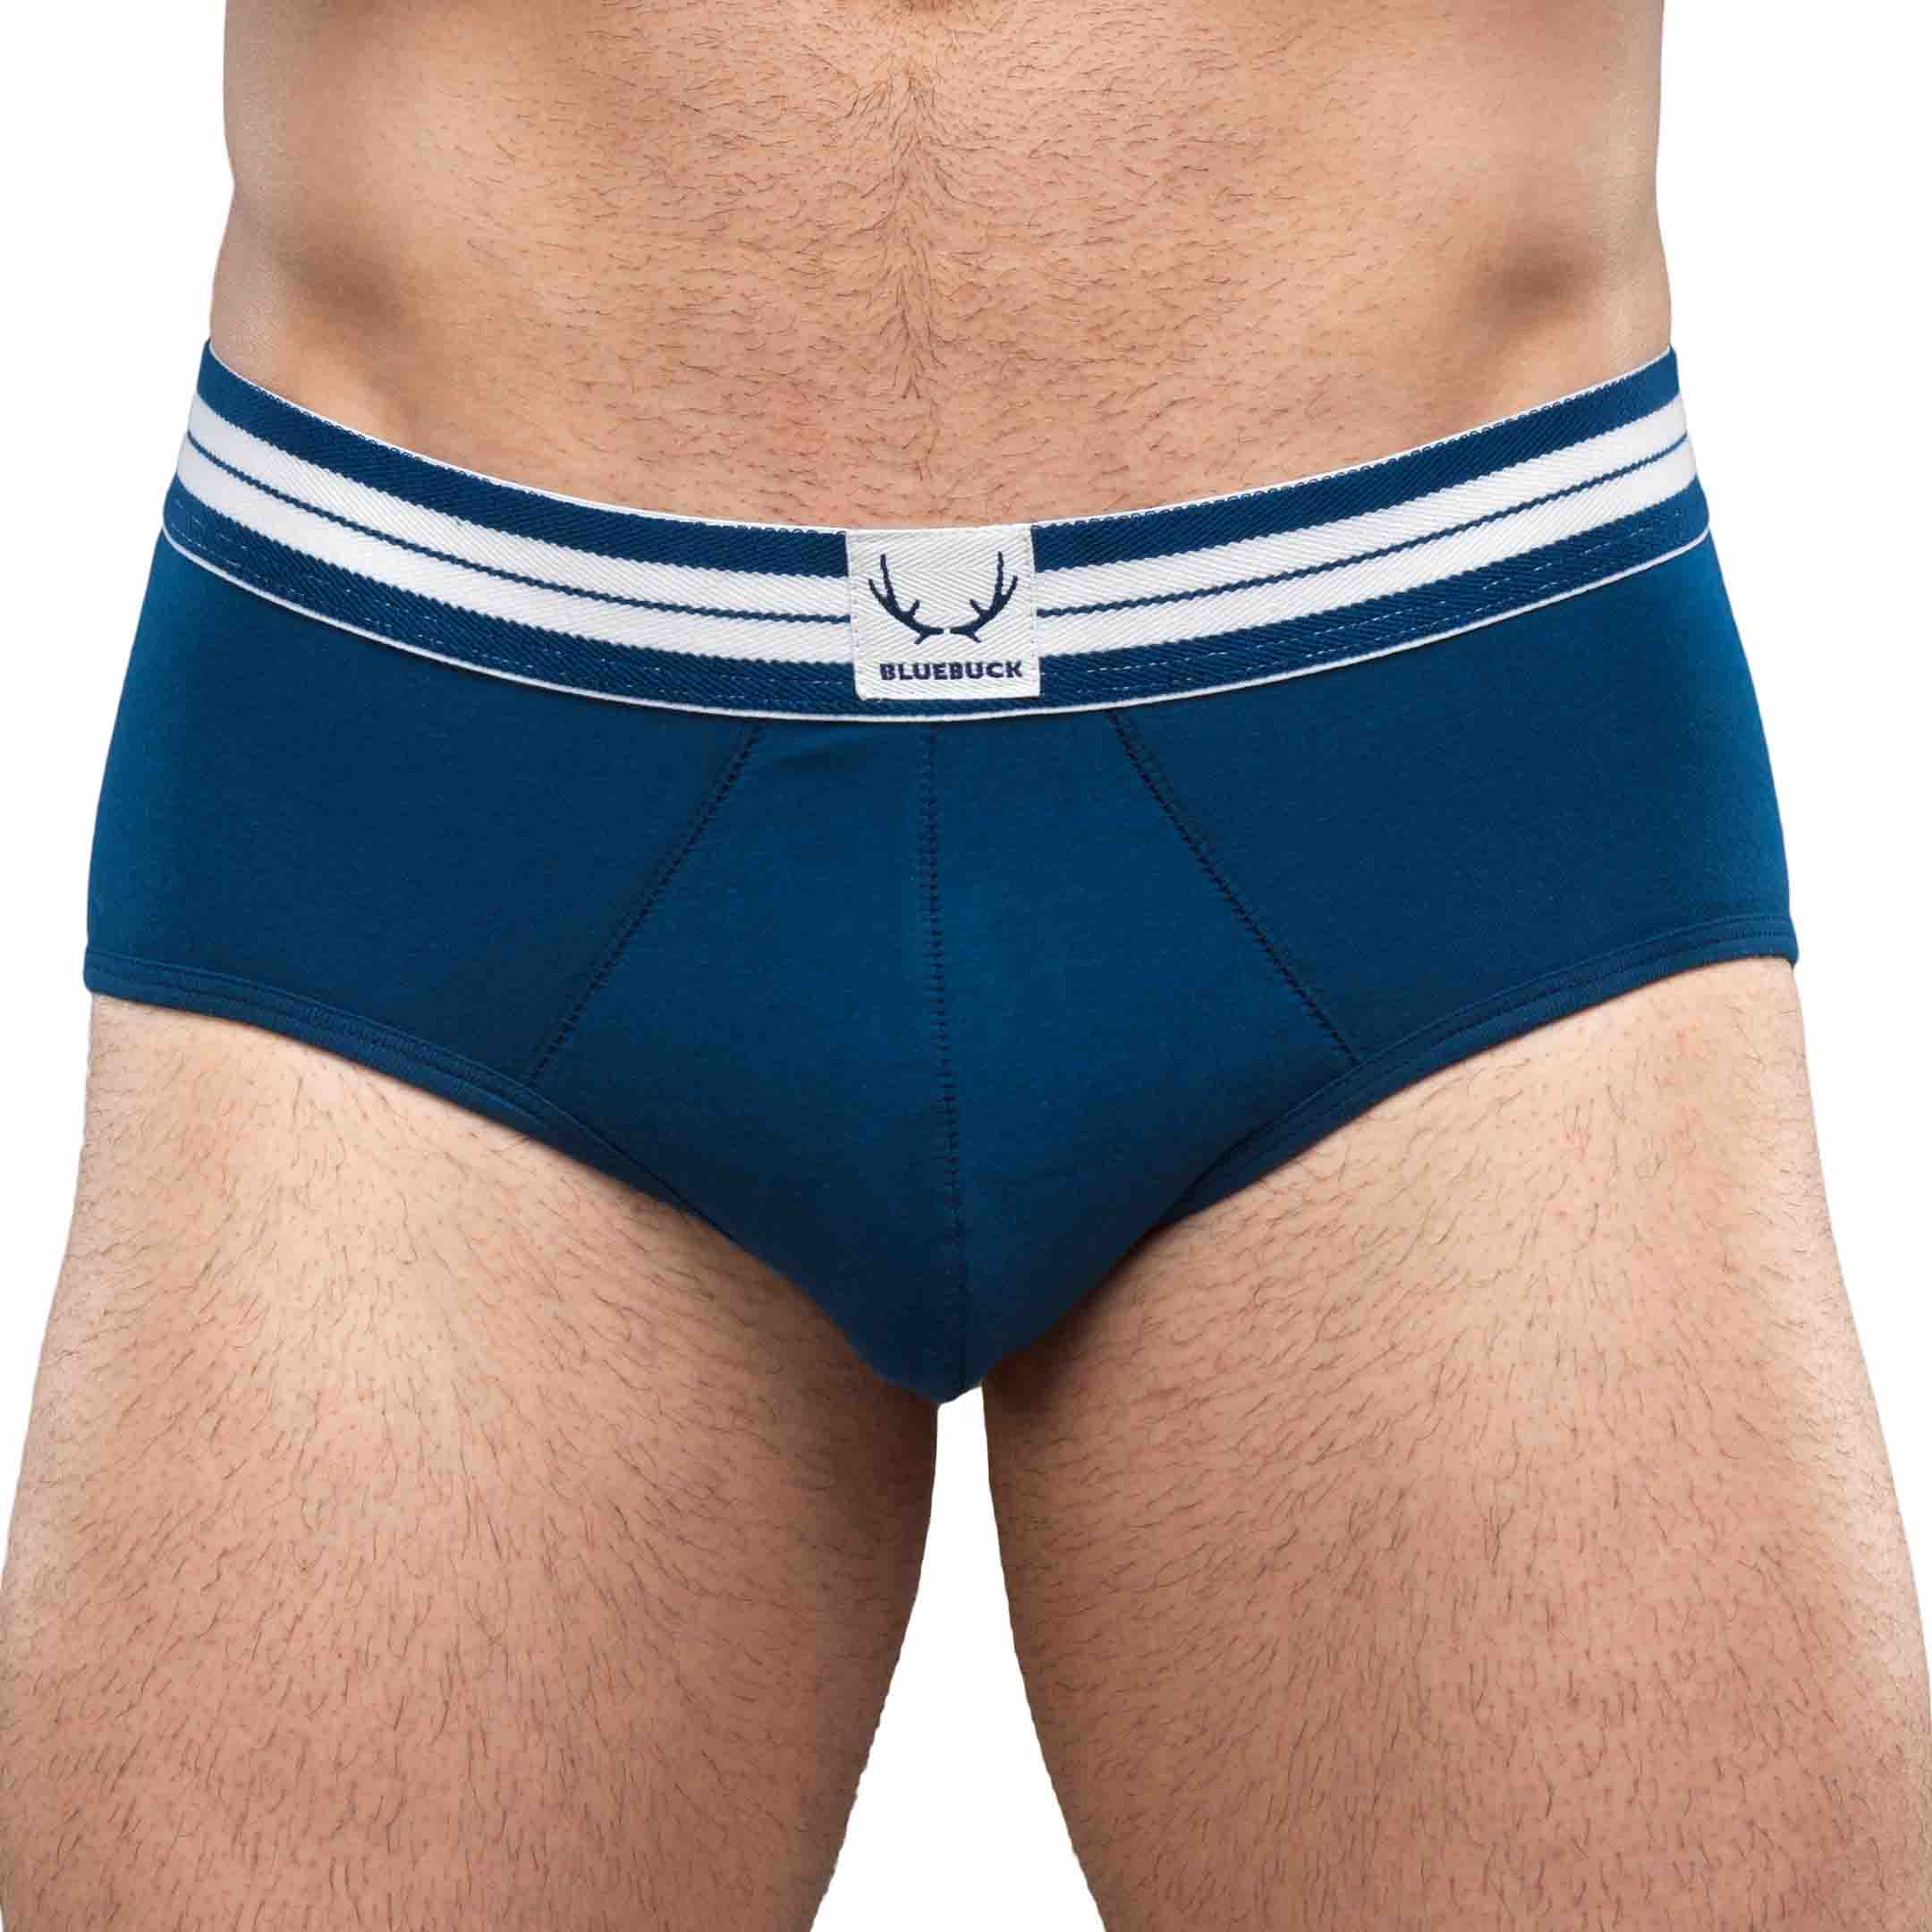 Navy blue underpants with blue stitching made of organic cotton from Bluebuck